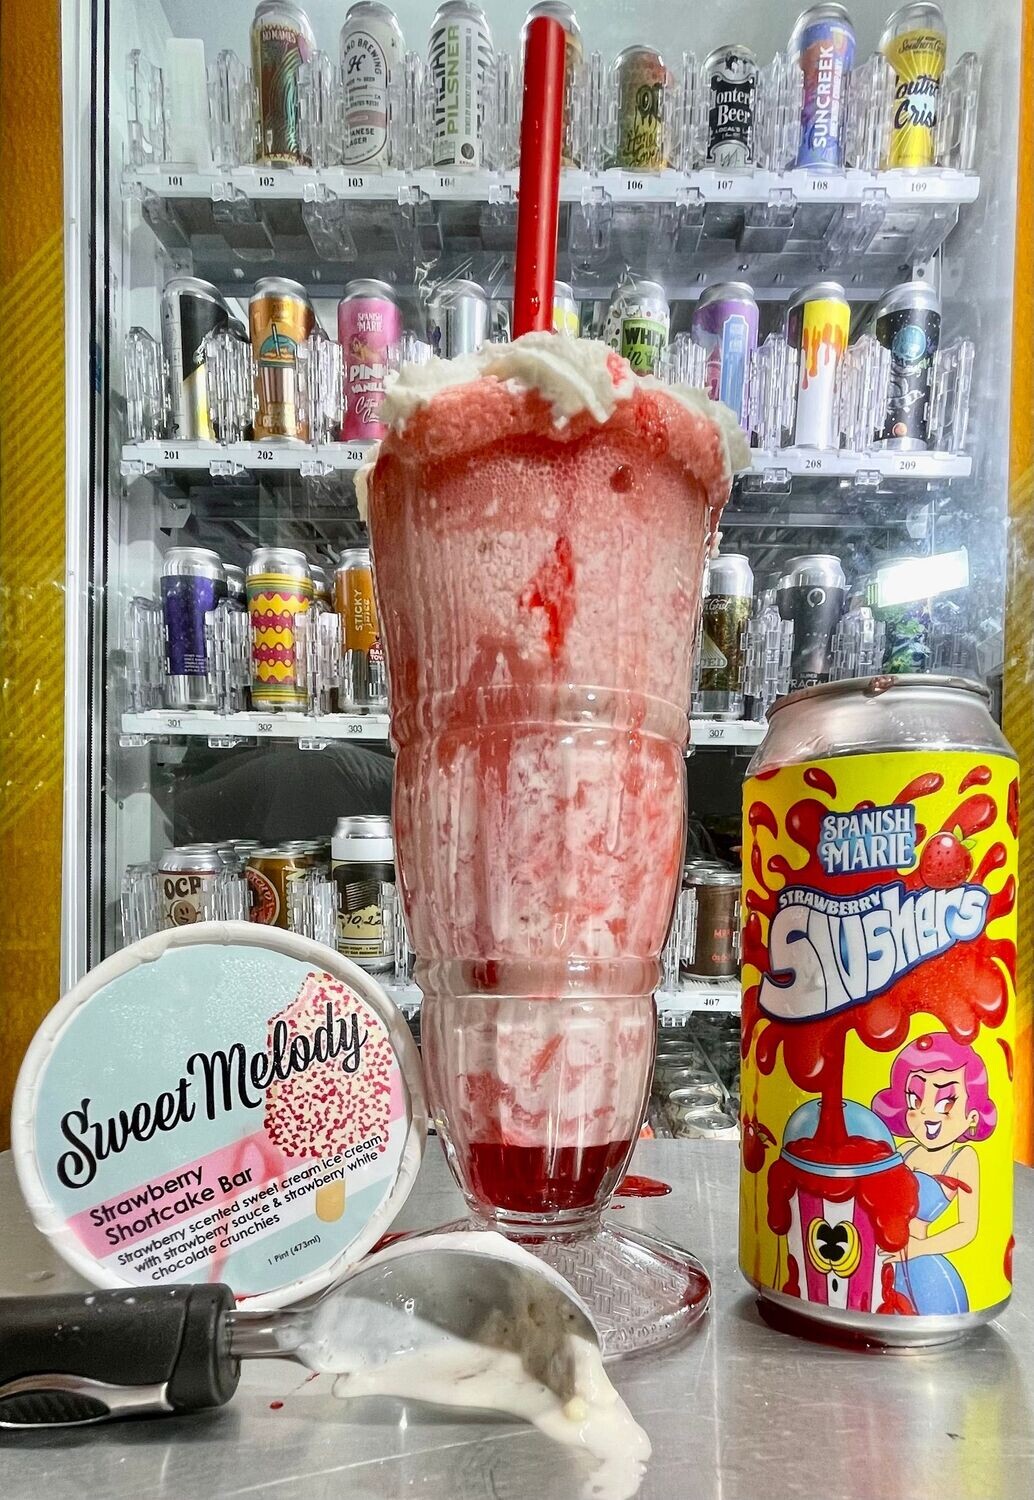 Crafty Beer Floats: Strawberry Shortcake Bar Slushers Beer Float with GLASS (16OZ CAN)